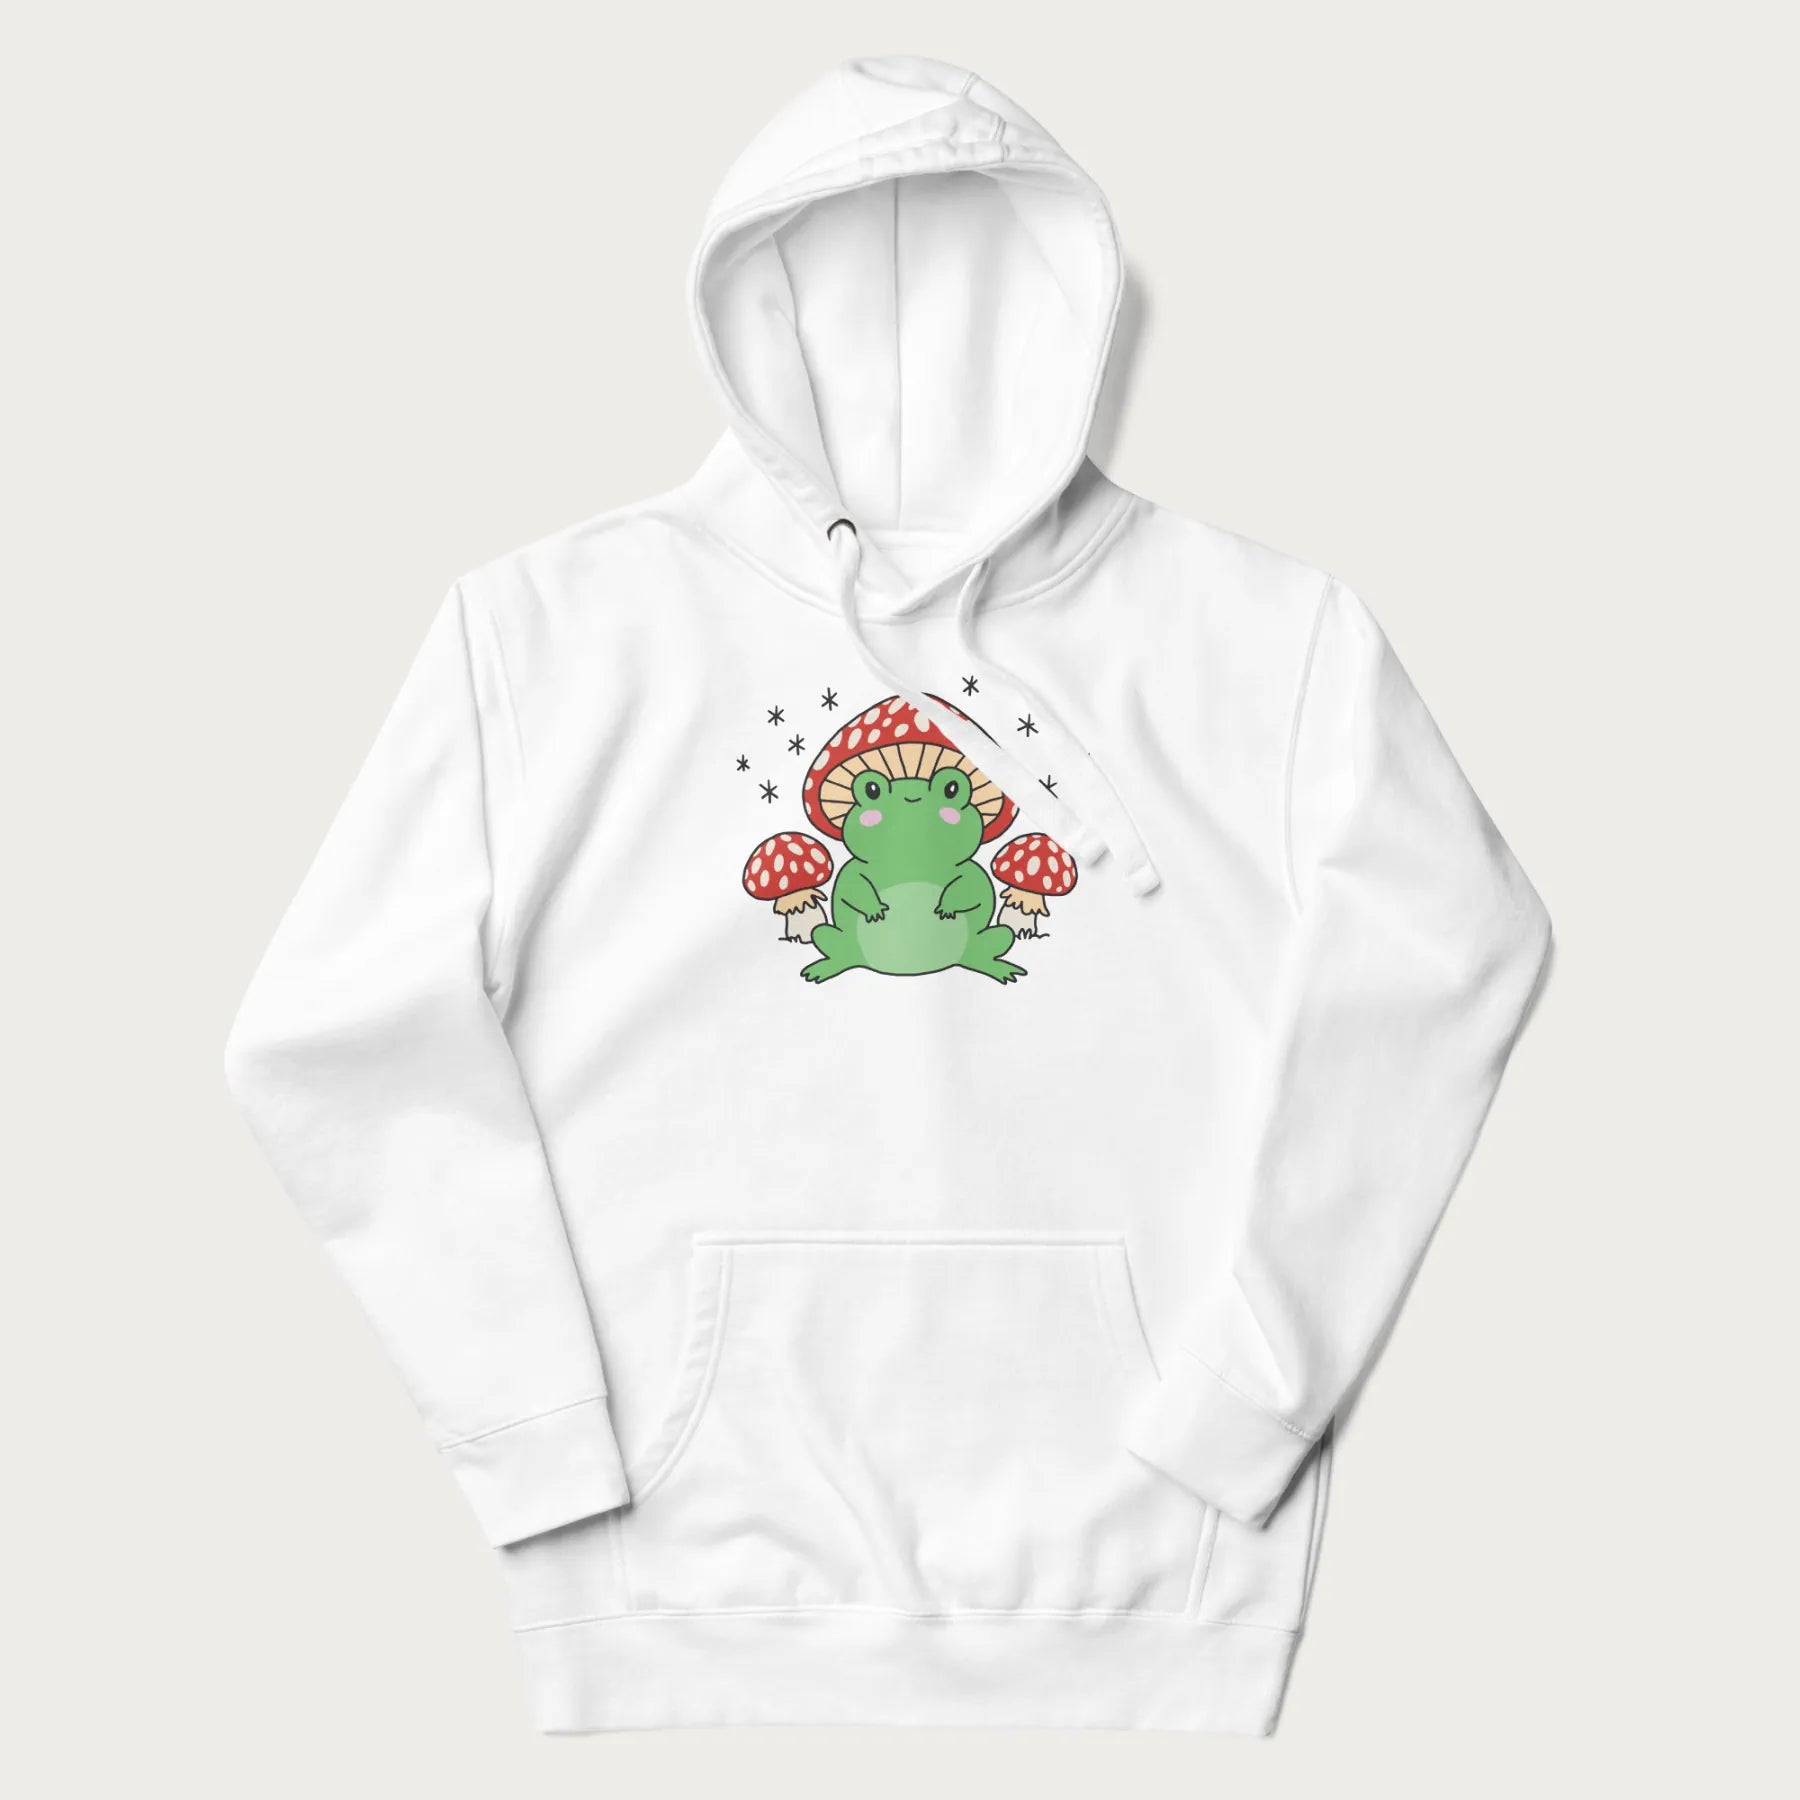 White hoodie will illustration of a cute green frog with red and white mushrooms.